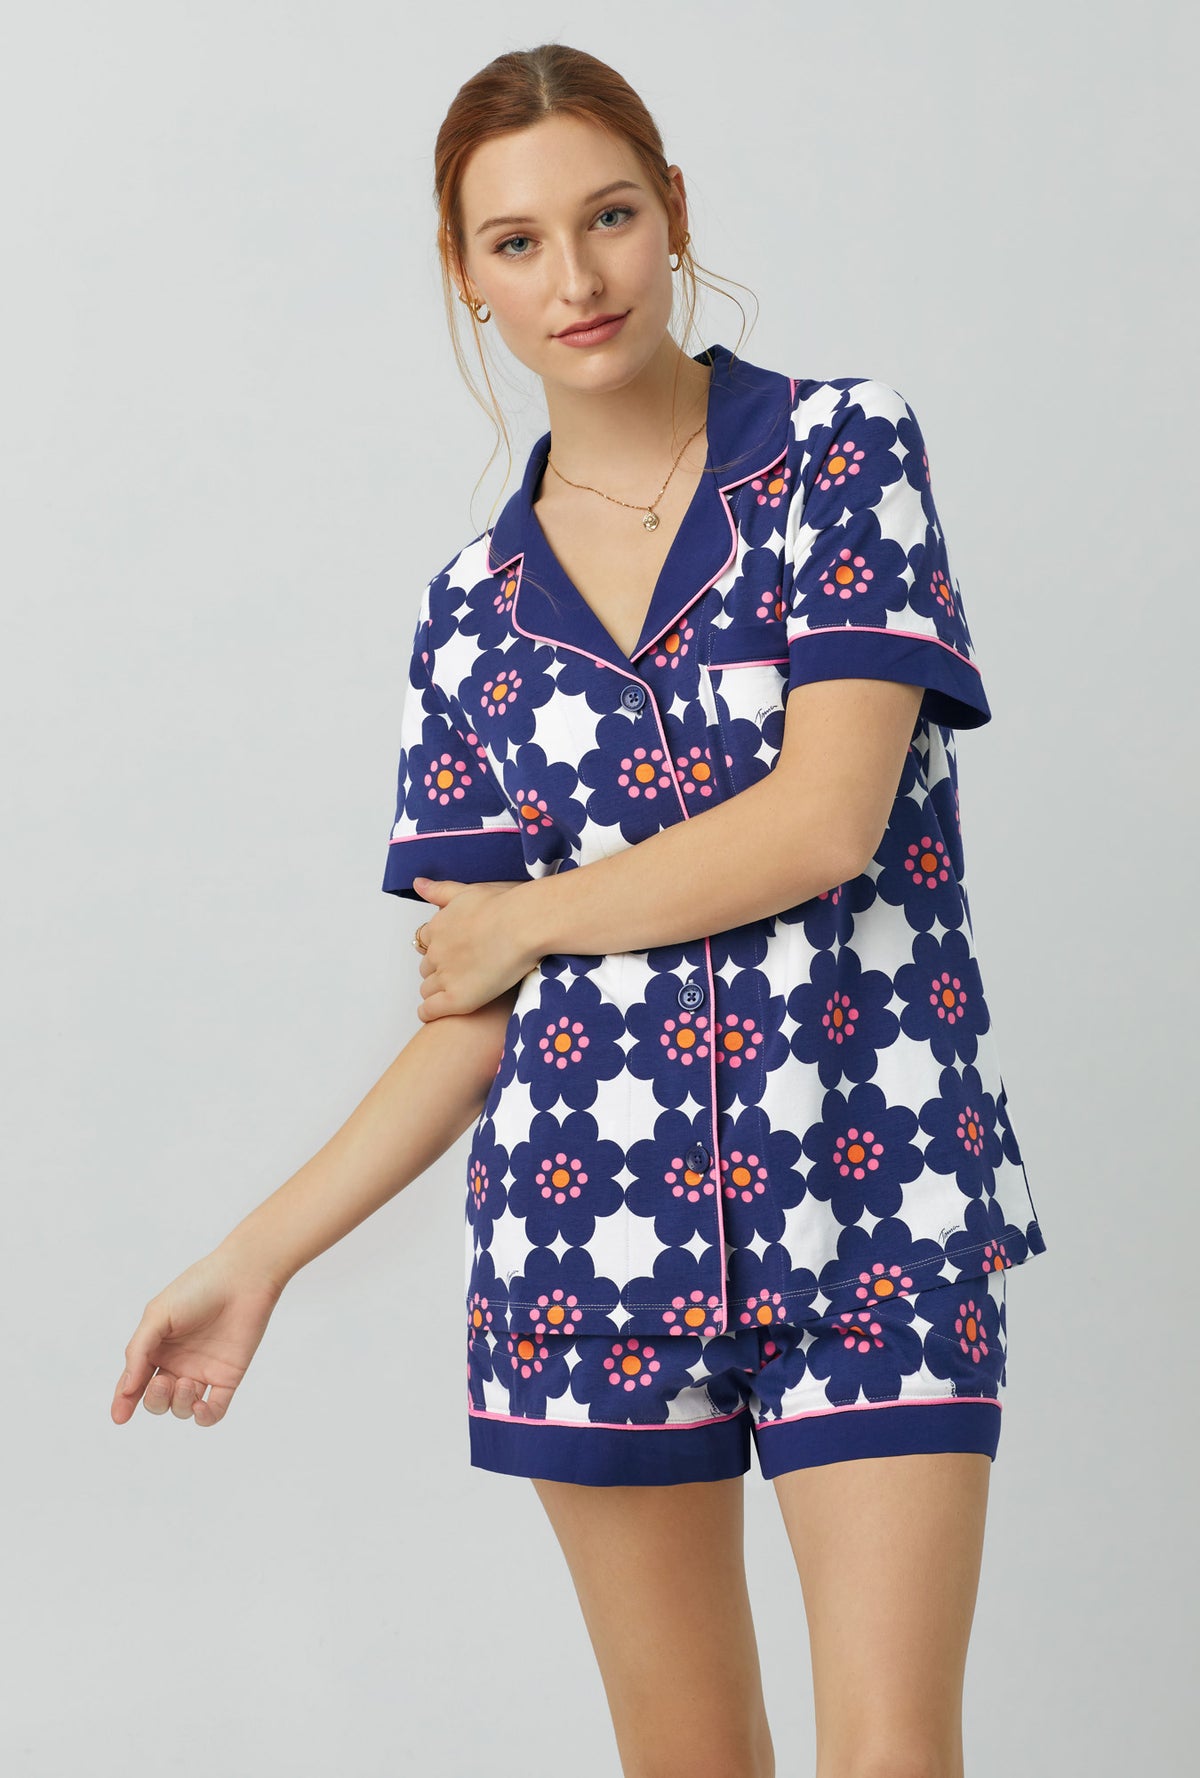 A lady wearing blue Short Sleeve Classic Shorty Stretch Jersey PJ Set with floral tile print